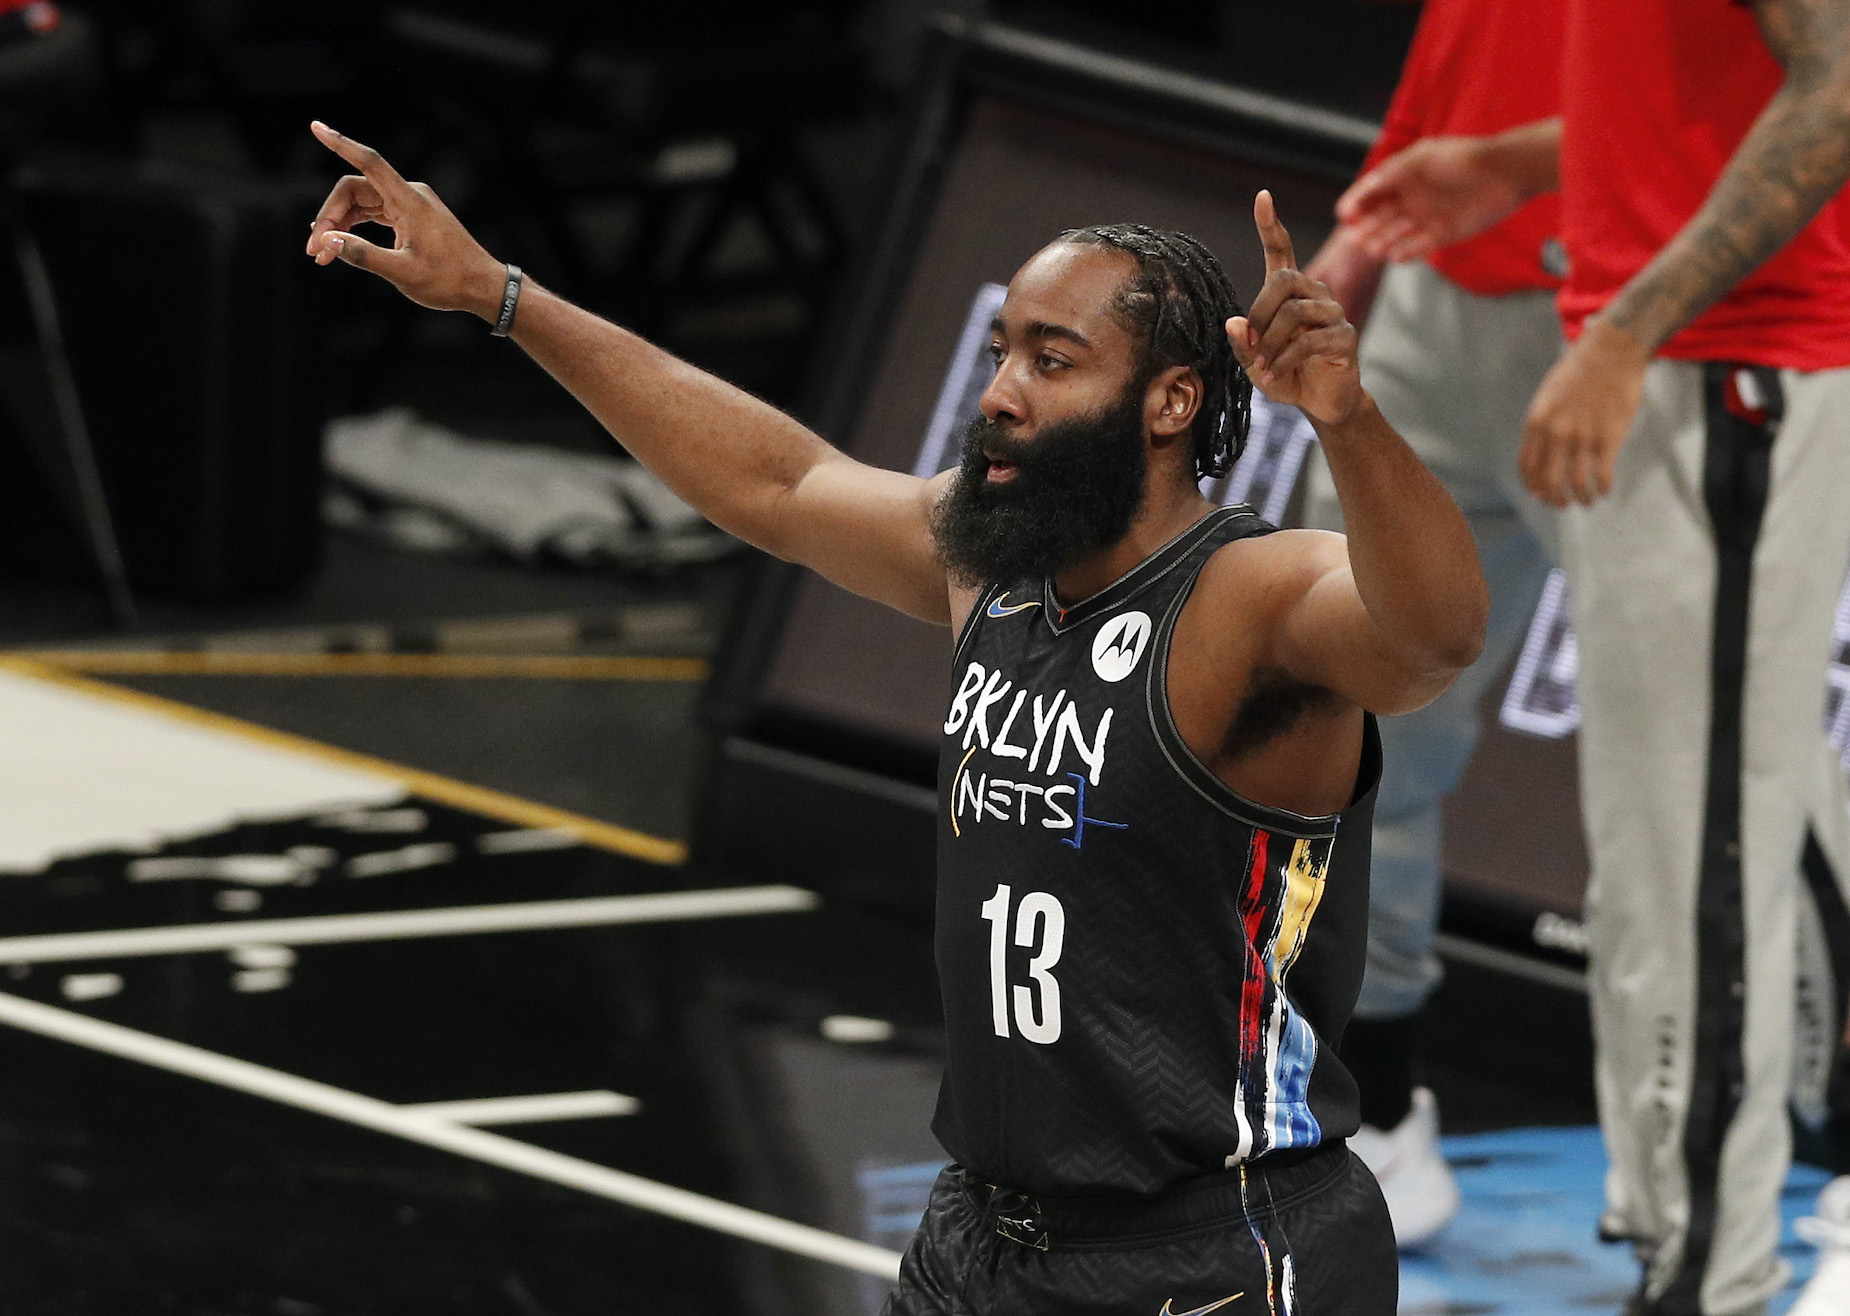 James Harden, who started the 2020-21 season with the Houston Rockets, in action as a member of the Brooklyn Nets.